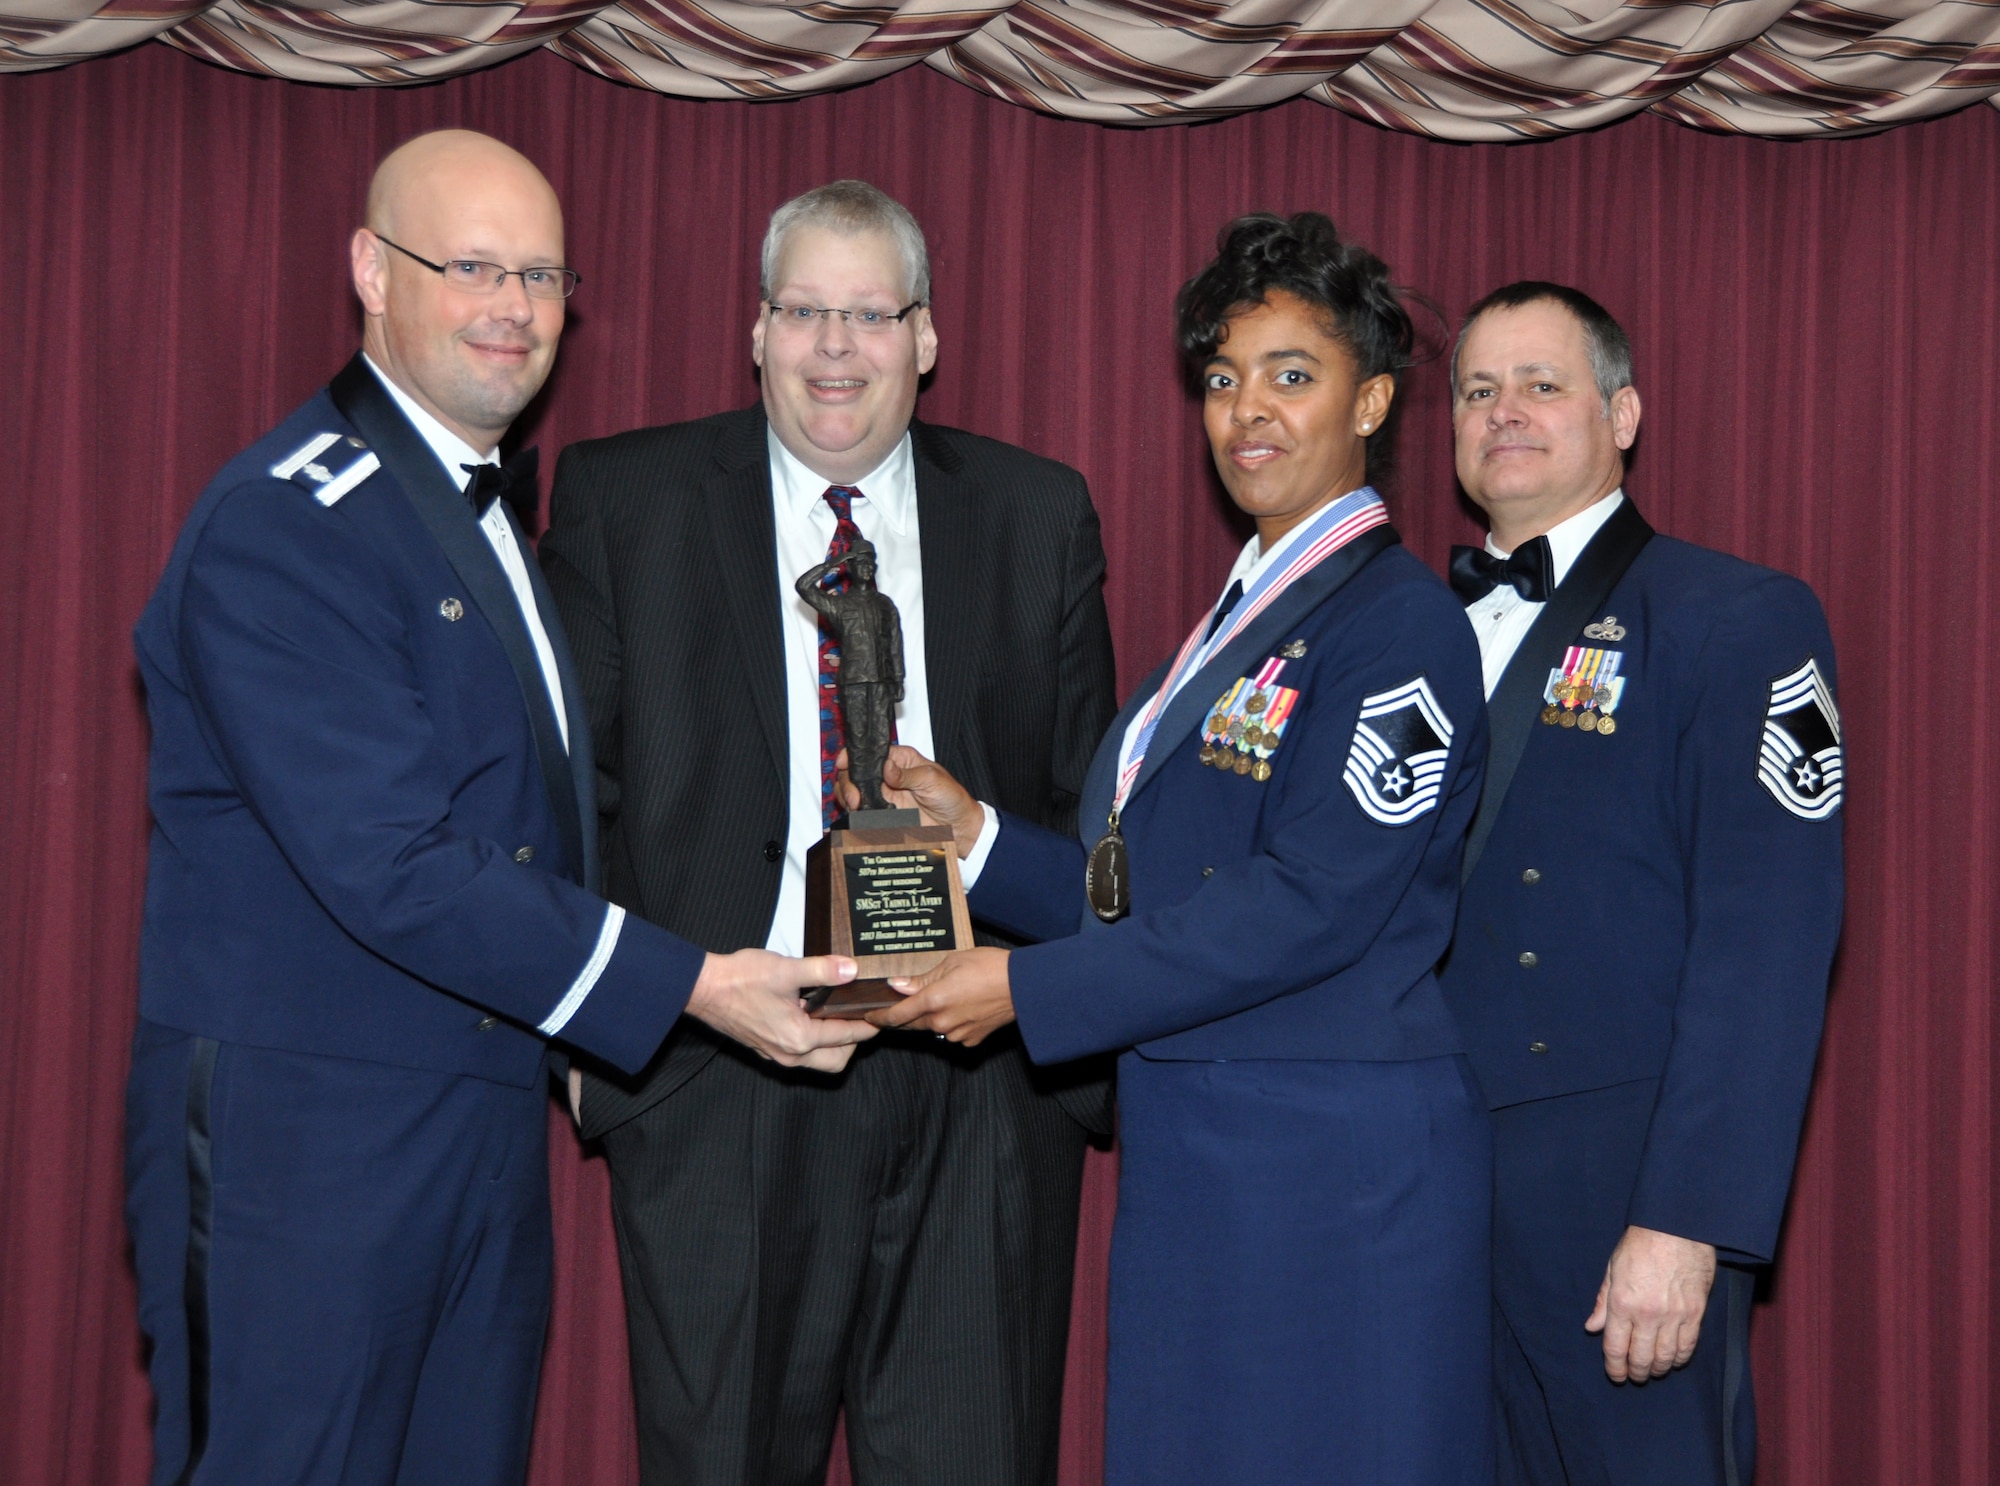 Senior Master Sgt. Taunya Avery receives the Gary Hughes Award from 507th Maintenance Group Commander, Lt. Col. Travis Caughlin, far left, Gary Hughes, left and Maintenance Squadron Superintendent Chief Master Sgt. Ronald Mitchell during the annual awards banquet at the Tinker club Nov. 23, 2013.  (U.S. Air Force photo/Maj. Jon Quinlan)